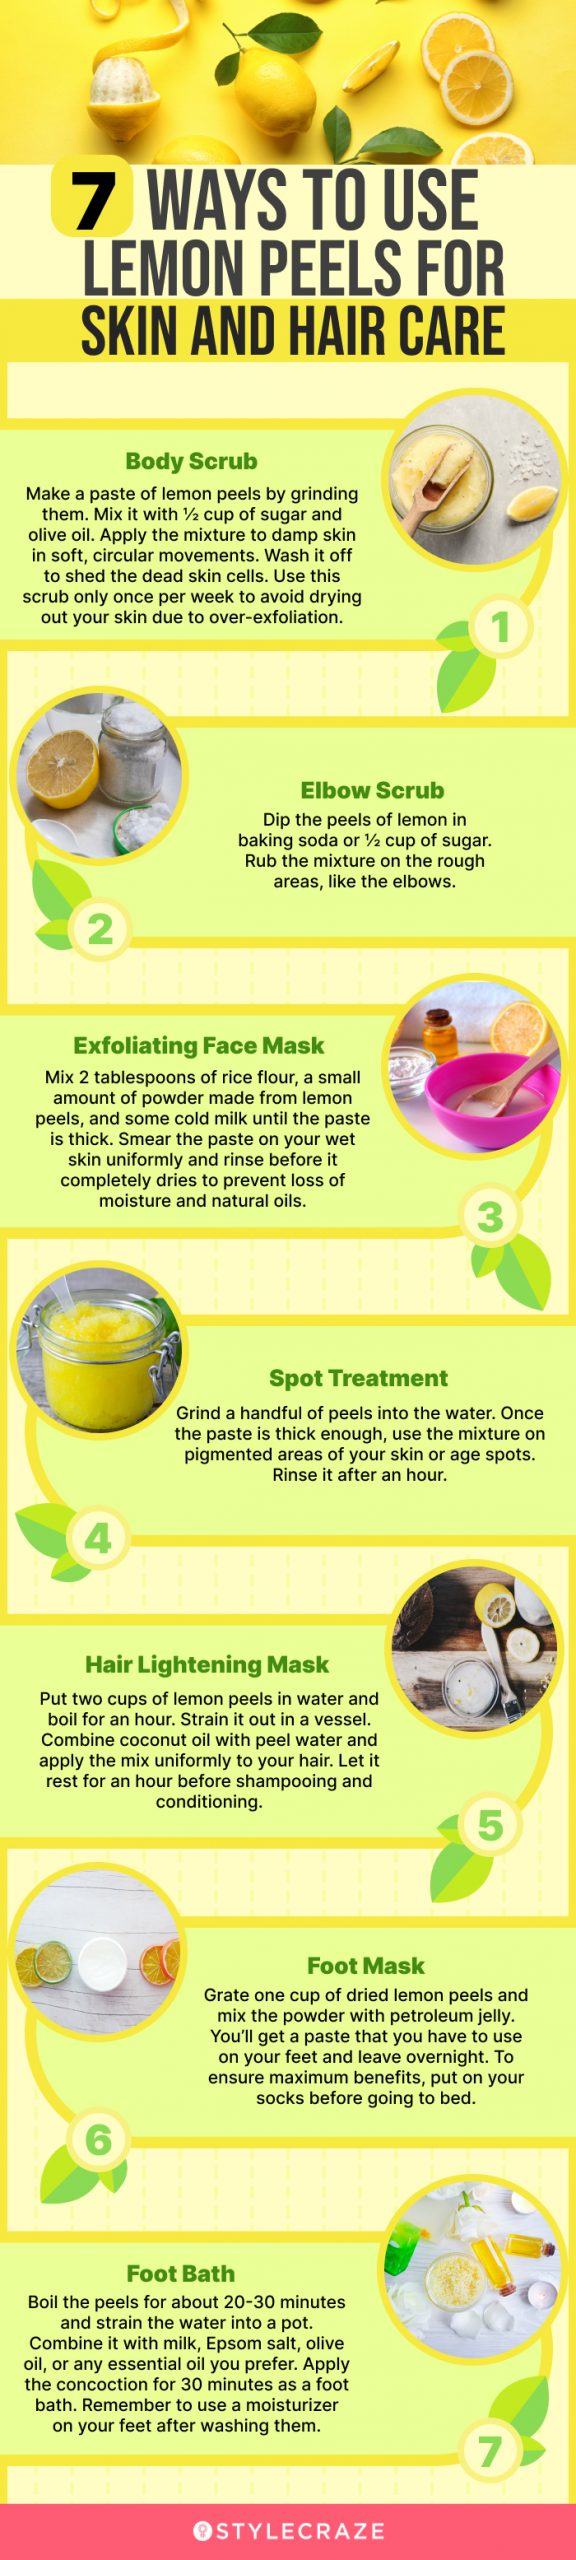 7 ways to use lemon peels for skin and hair care (infographic)